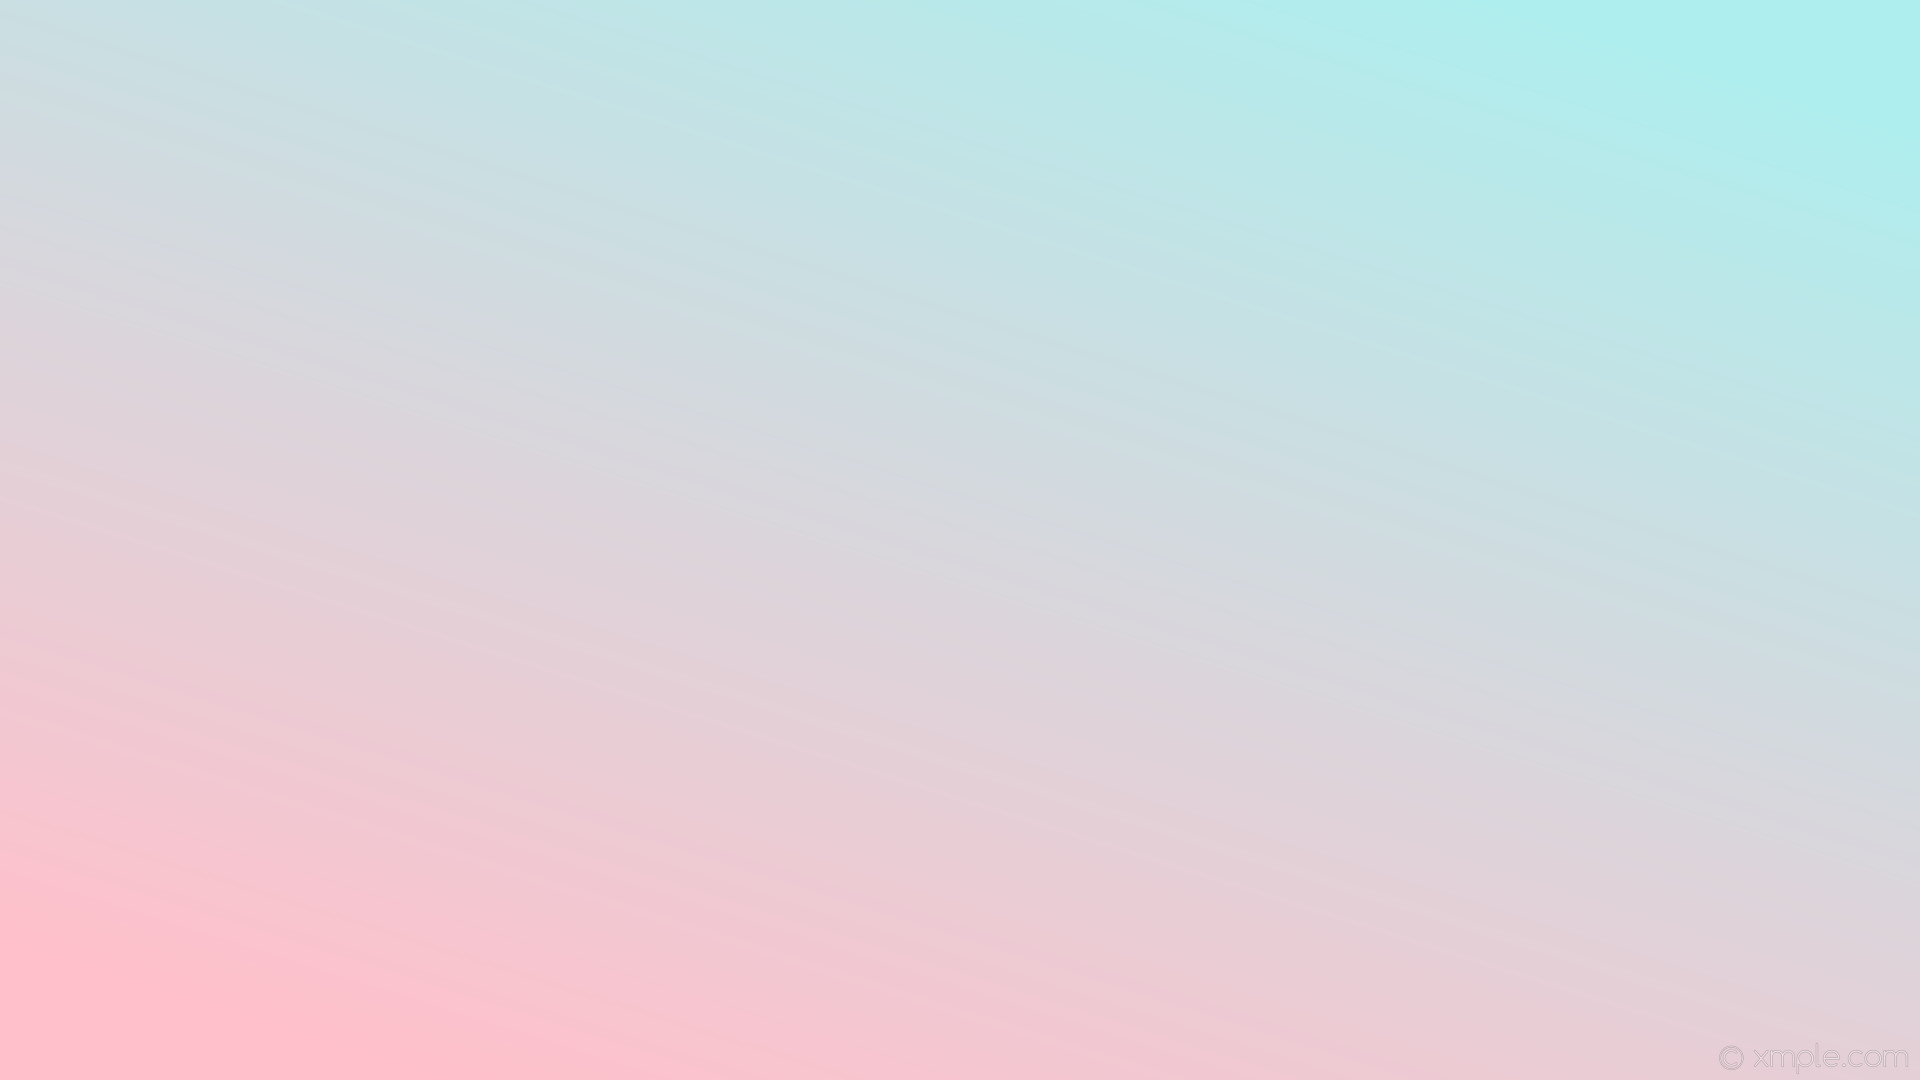 1920x1080 wallpaper blue linear pink gradient pale turquoise #ffc0cb #afeeee 225Â°